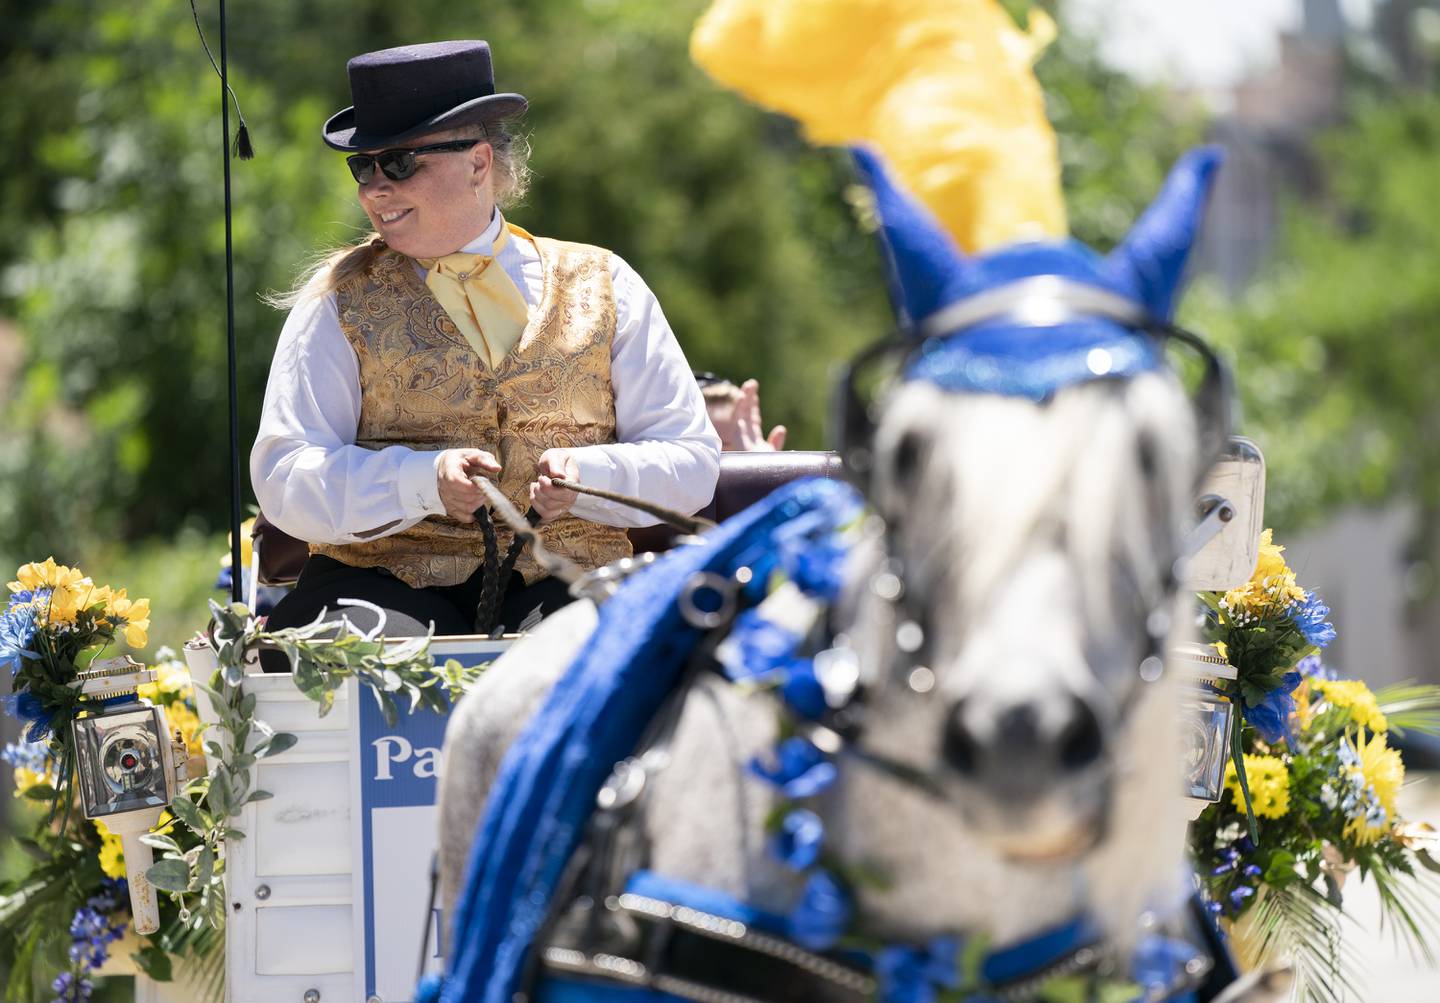 Lyla Blanchard with Royal Carriage Ltd. and her horse Beau, participate during the annual Swedish Days Parade in downtown Geneva on Sunday, June 26, 2022. The parade marked the last day of the festival which ran from June 22-26.